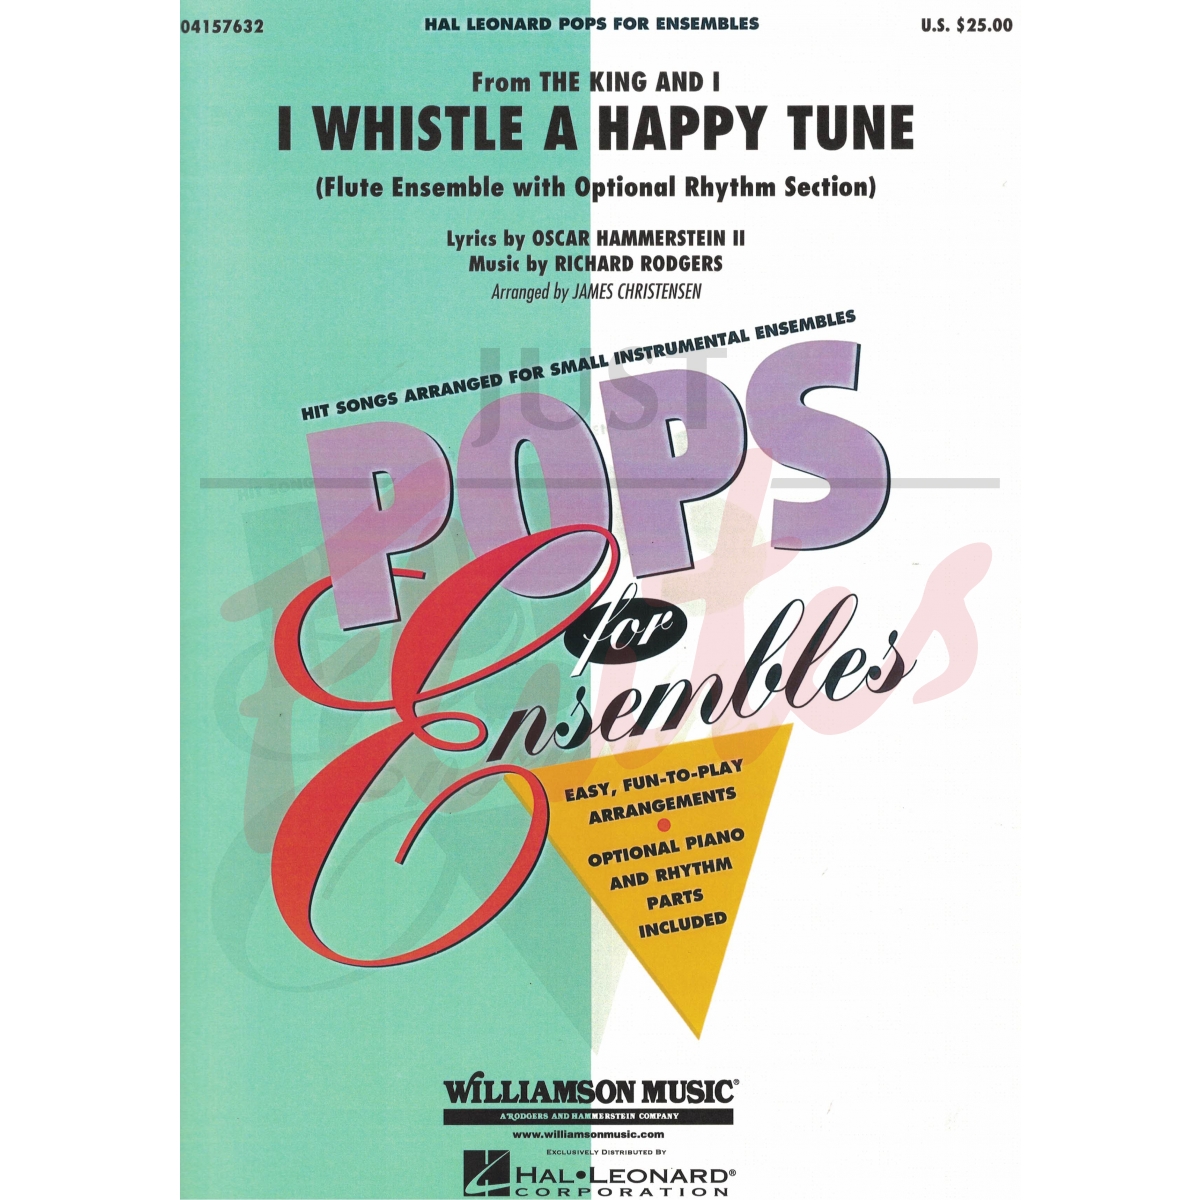 I Whistle a Happy Tune from 'The King and I' for Three Flutes and Piano